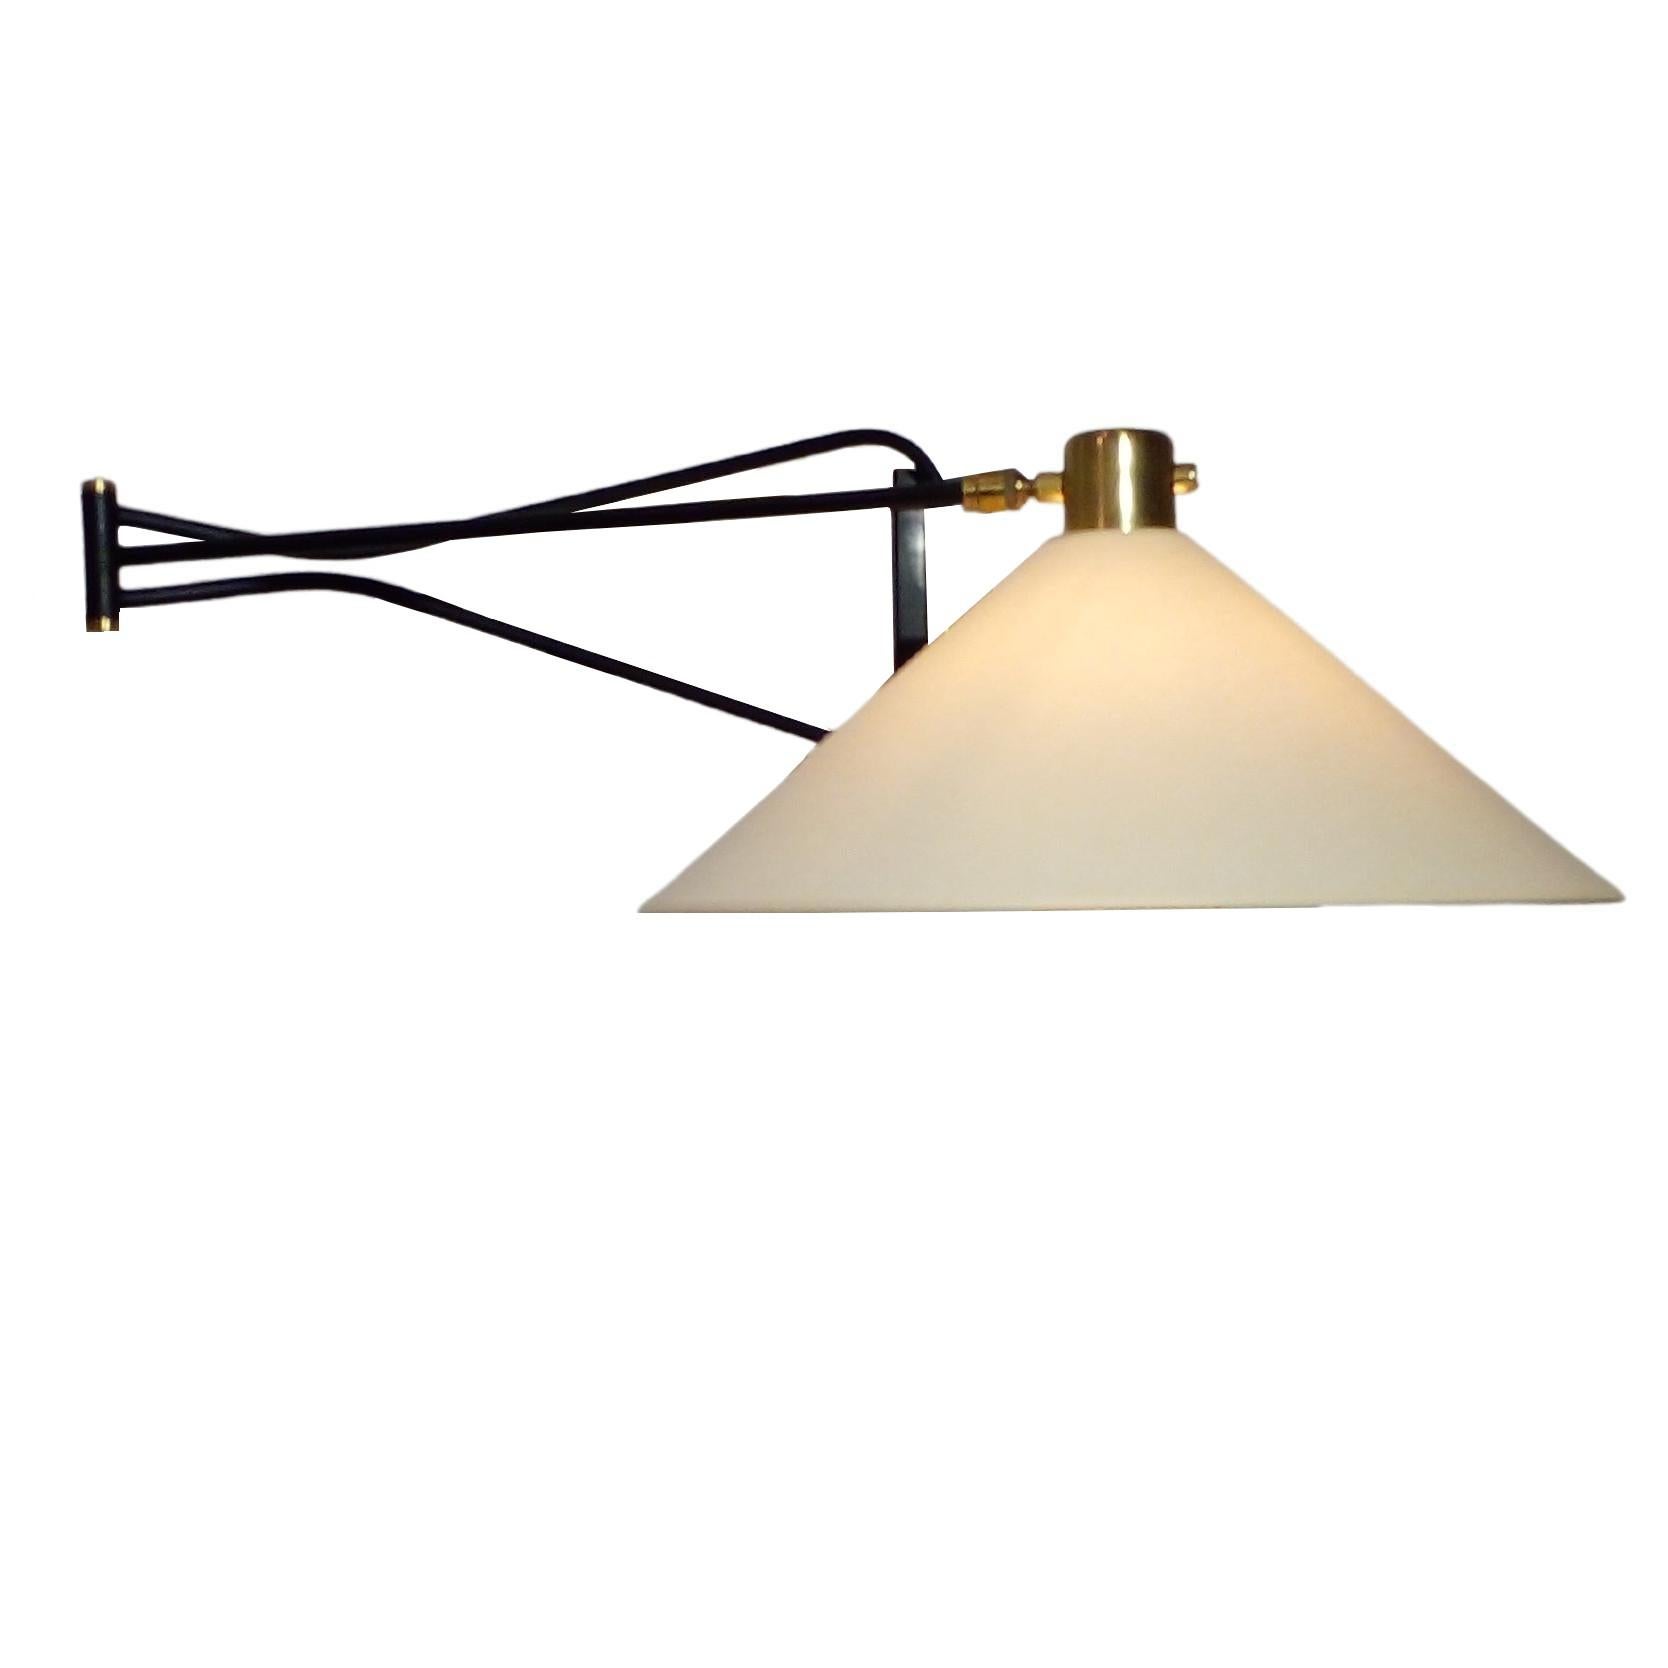 Mid-Century Modern Foldable and Adjustable Wall Lamp by Arlus, France circa 1950